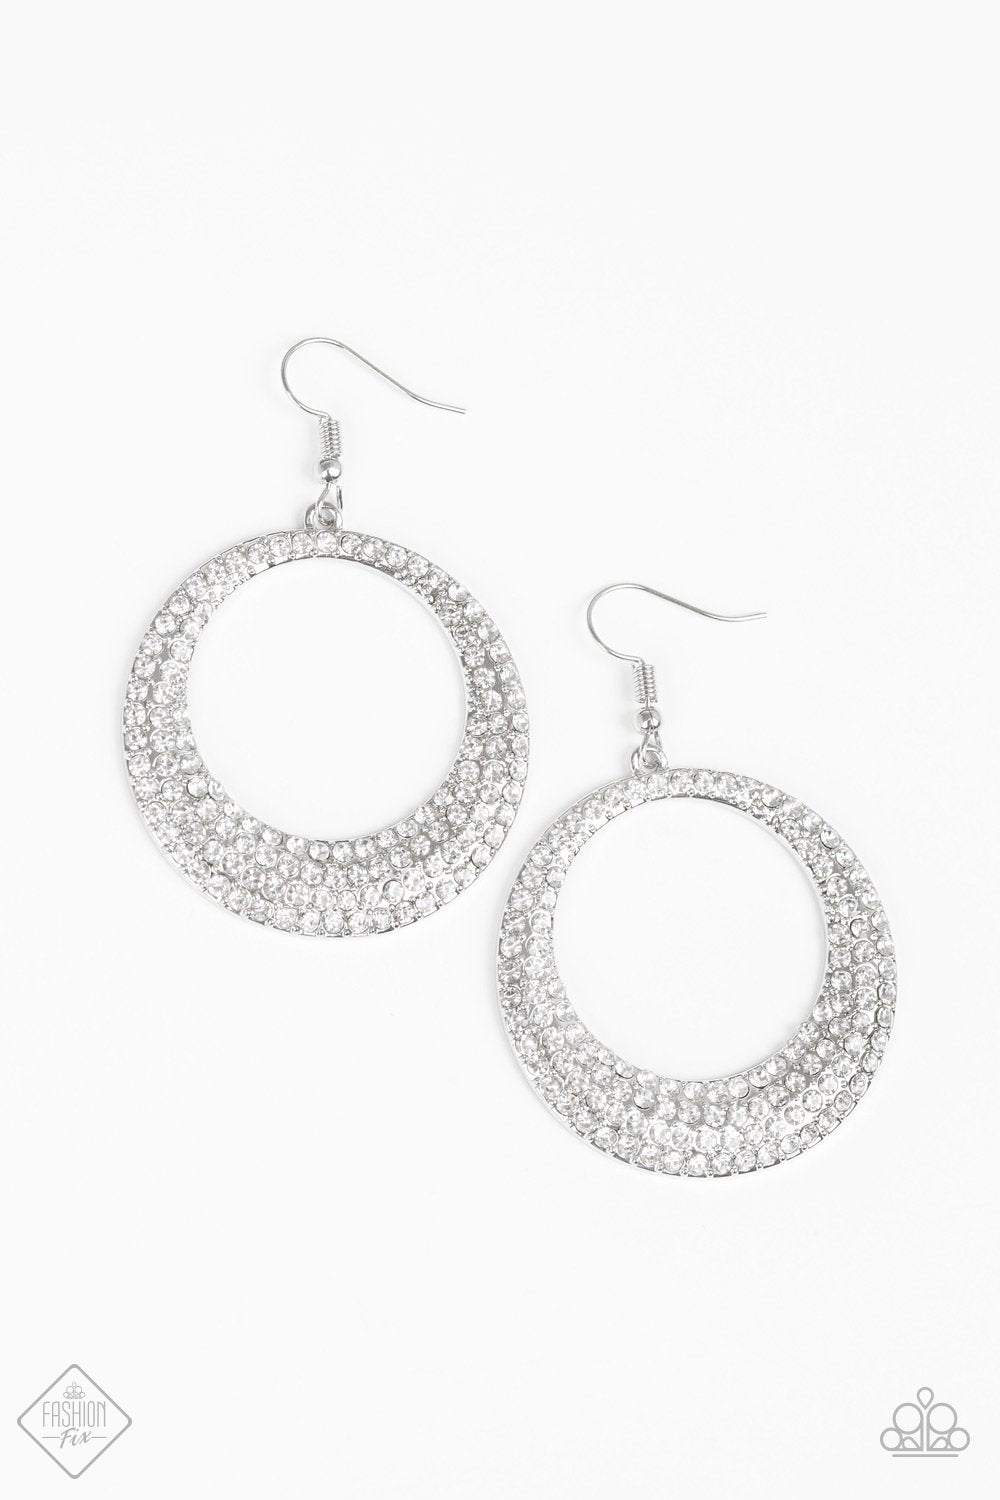 Paparazzi Accessories Very Victorious - White Earring - Be Adored Jewelry